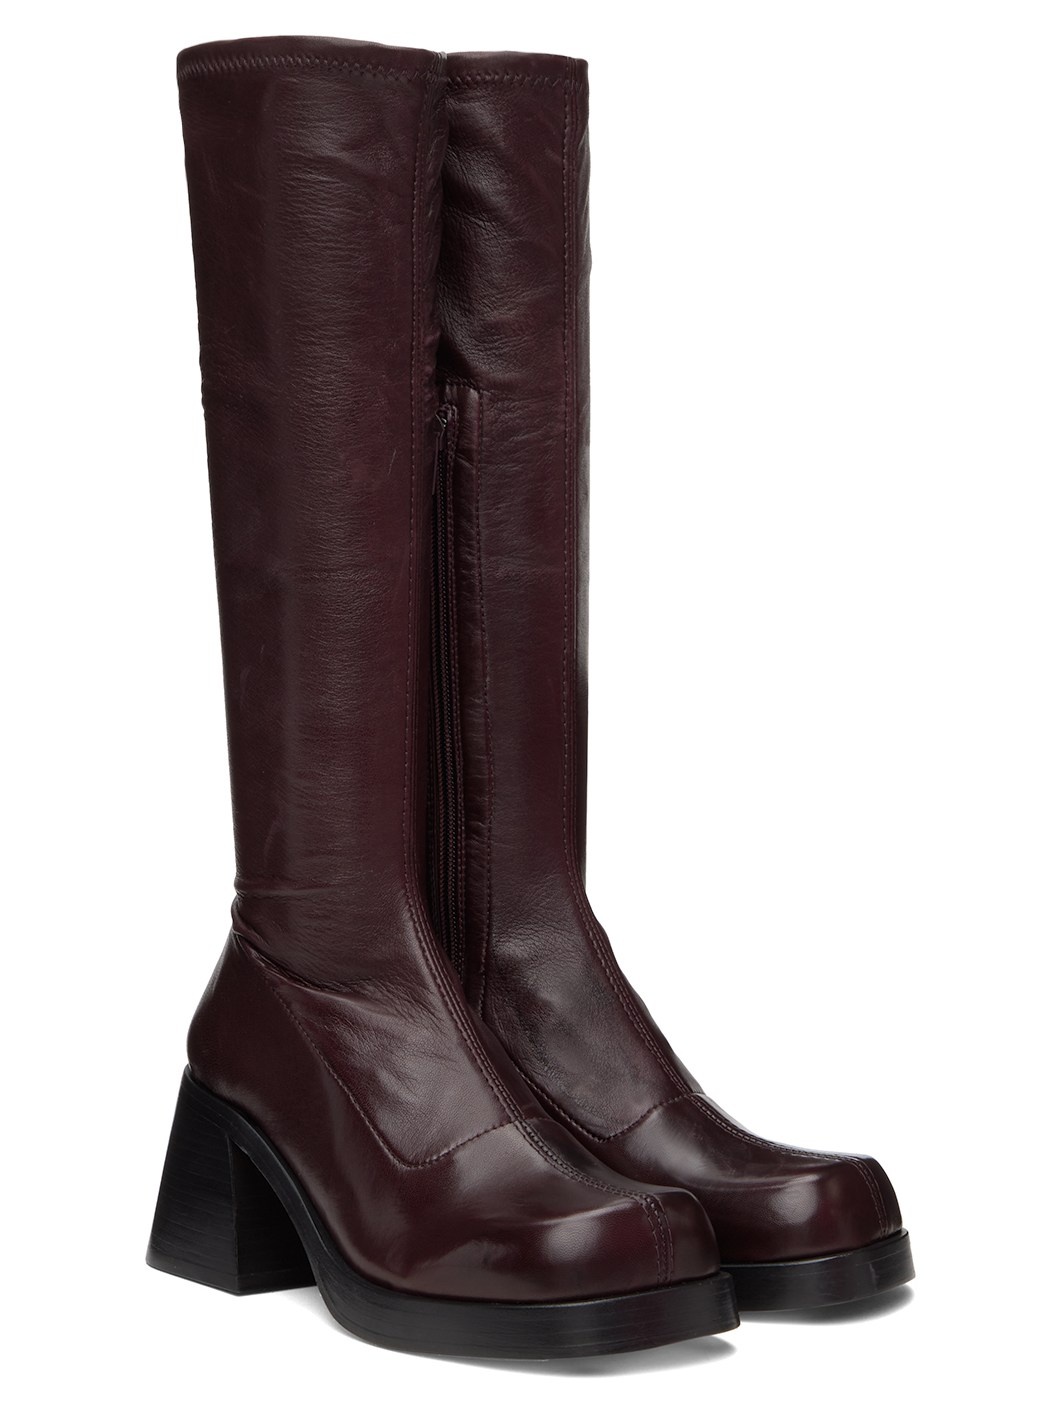 Burgundy Hedy Boots - 4